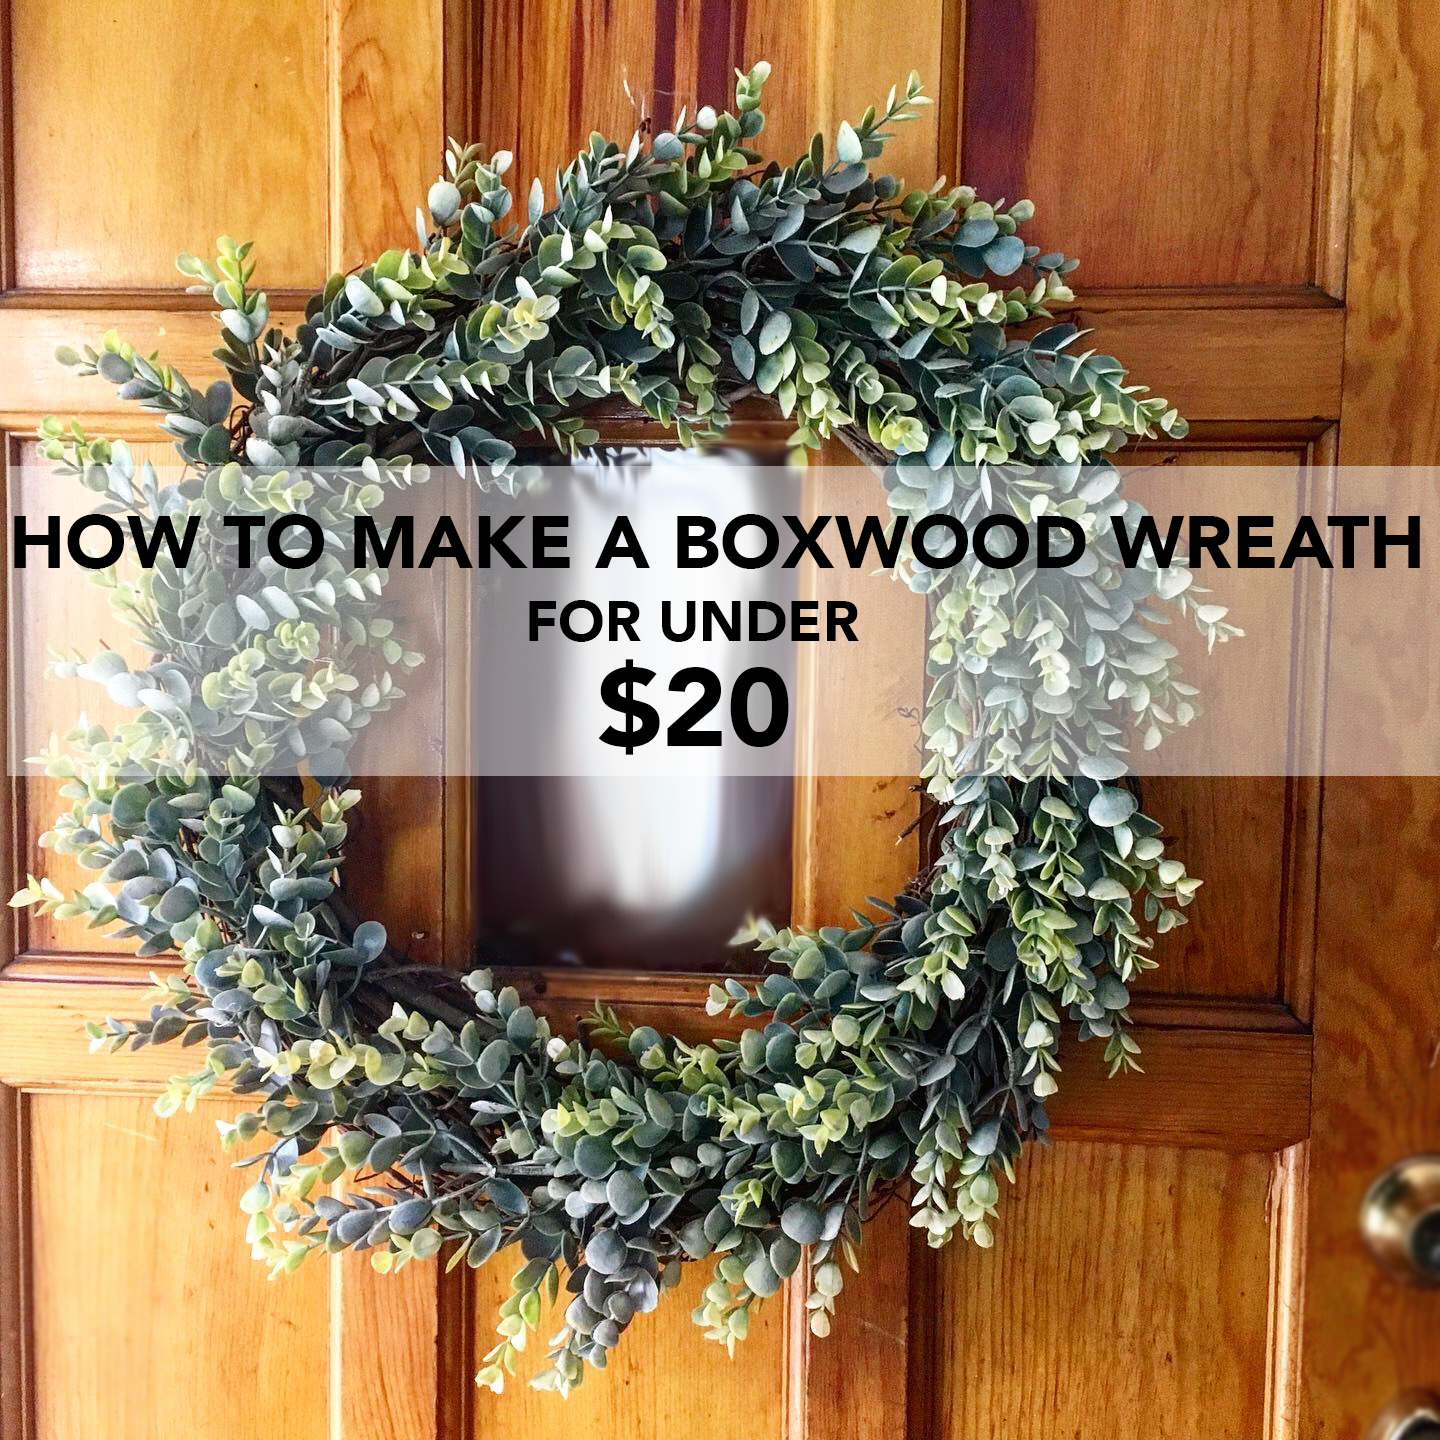 Here is our complete tutorial for How to make a Boxwood wreath for under $20.